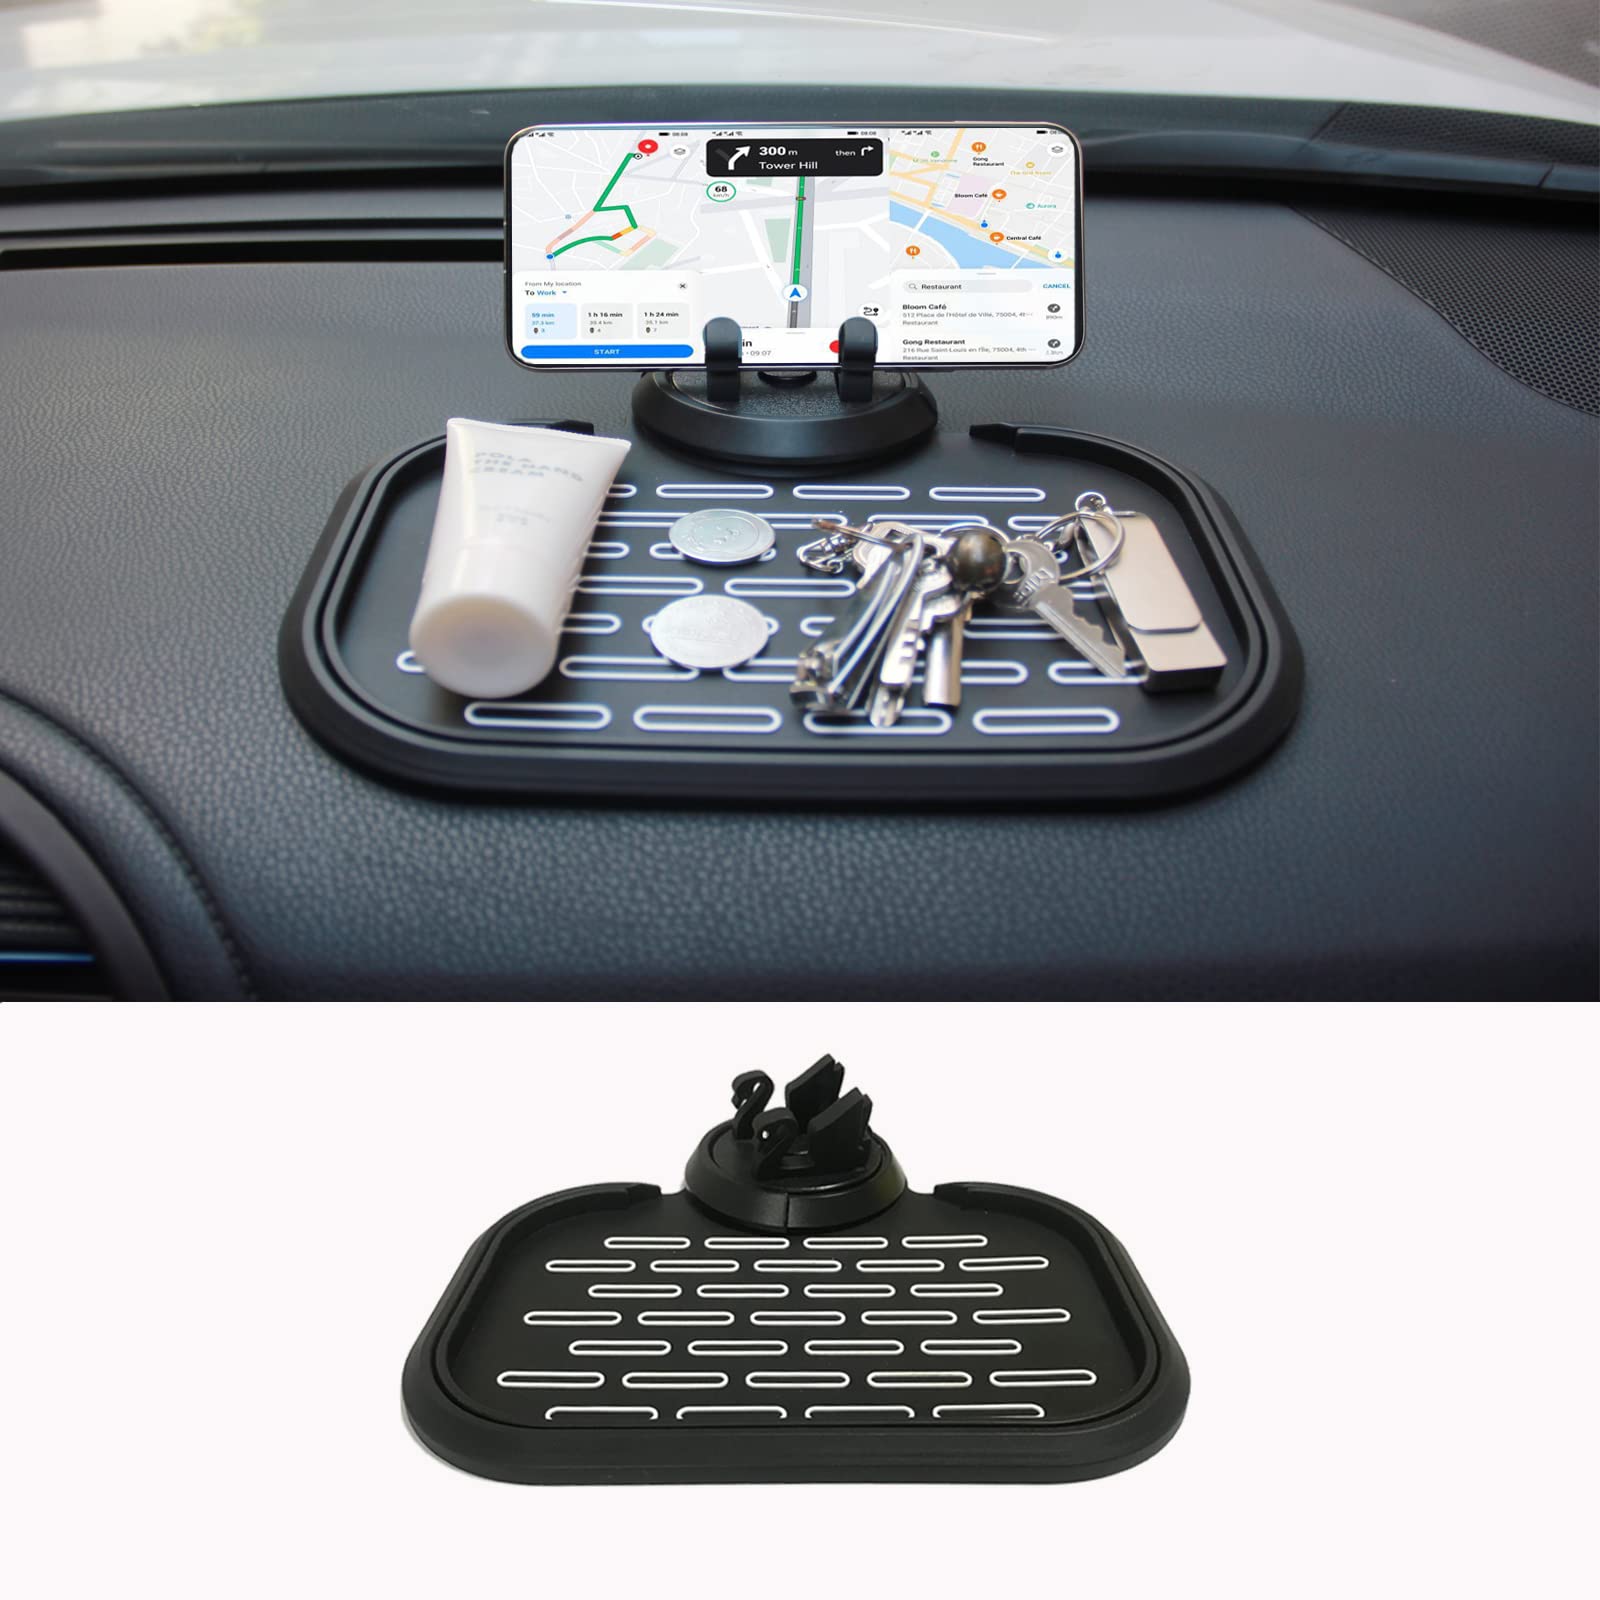 Non-Slip Phone Pad for Car Dashboard, Universal 360 Degree Rotating Car Phone Holder Multifunctional Anti-Shake Phone Mat for Cell Phone GPS Sunglasses Keychains Coins with Temporary Parking Number